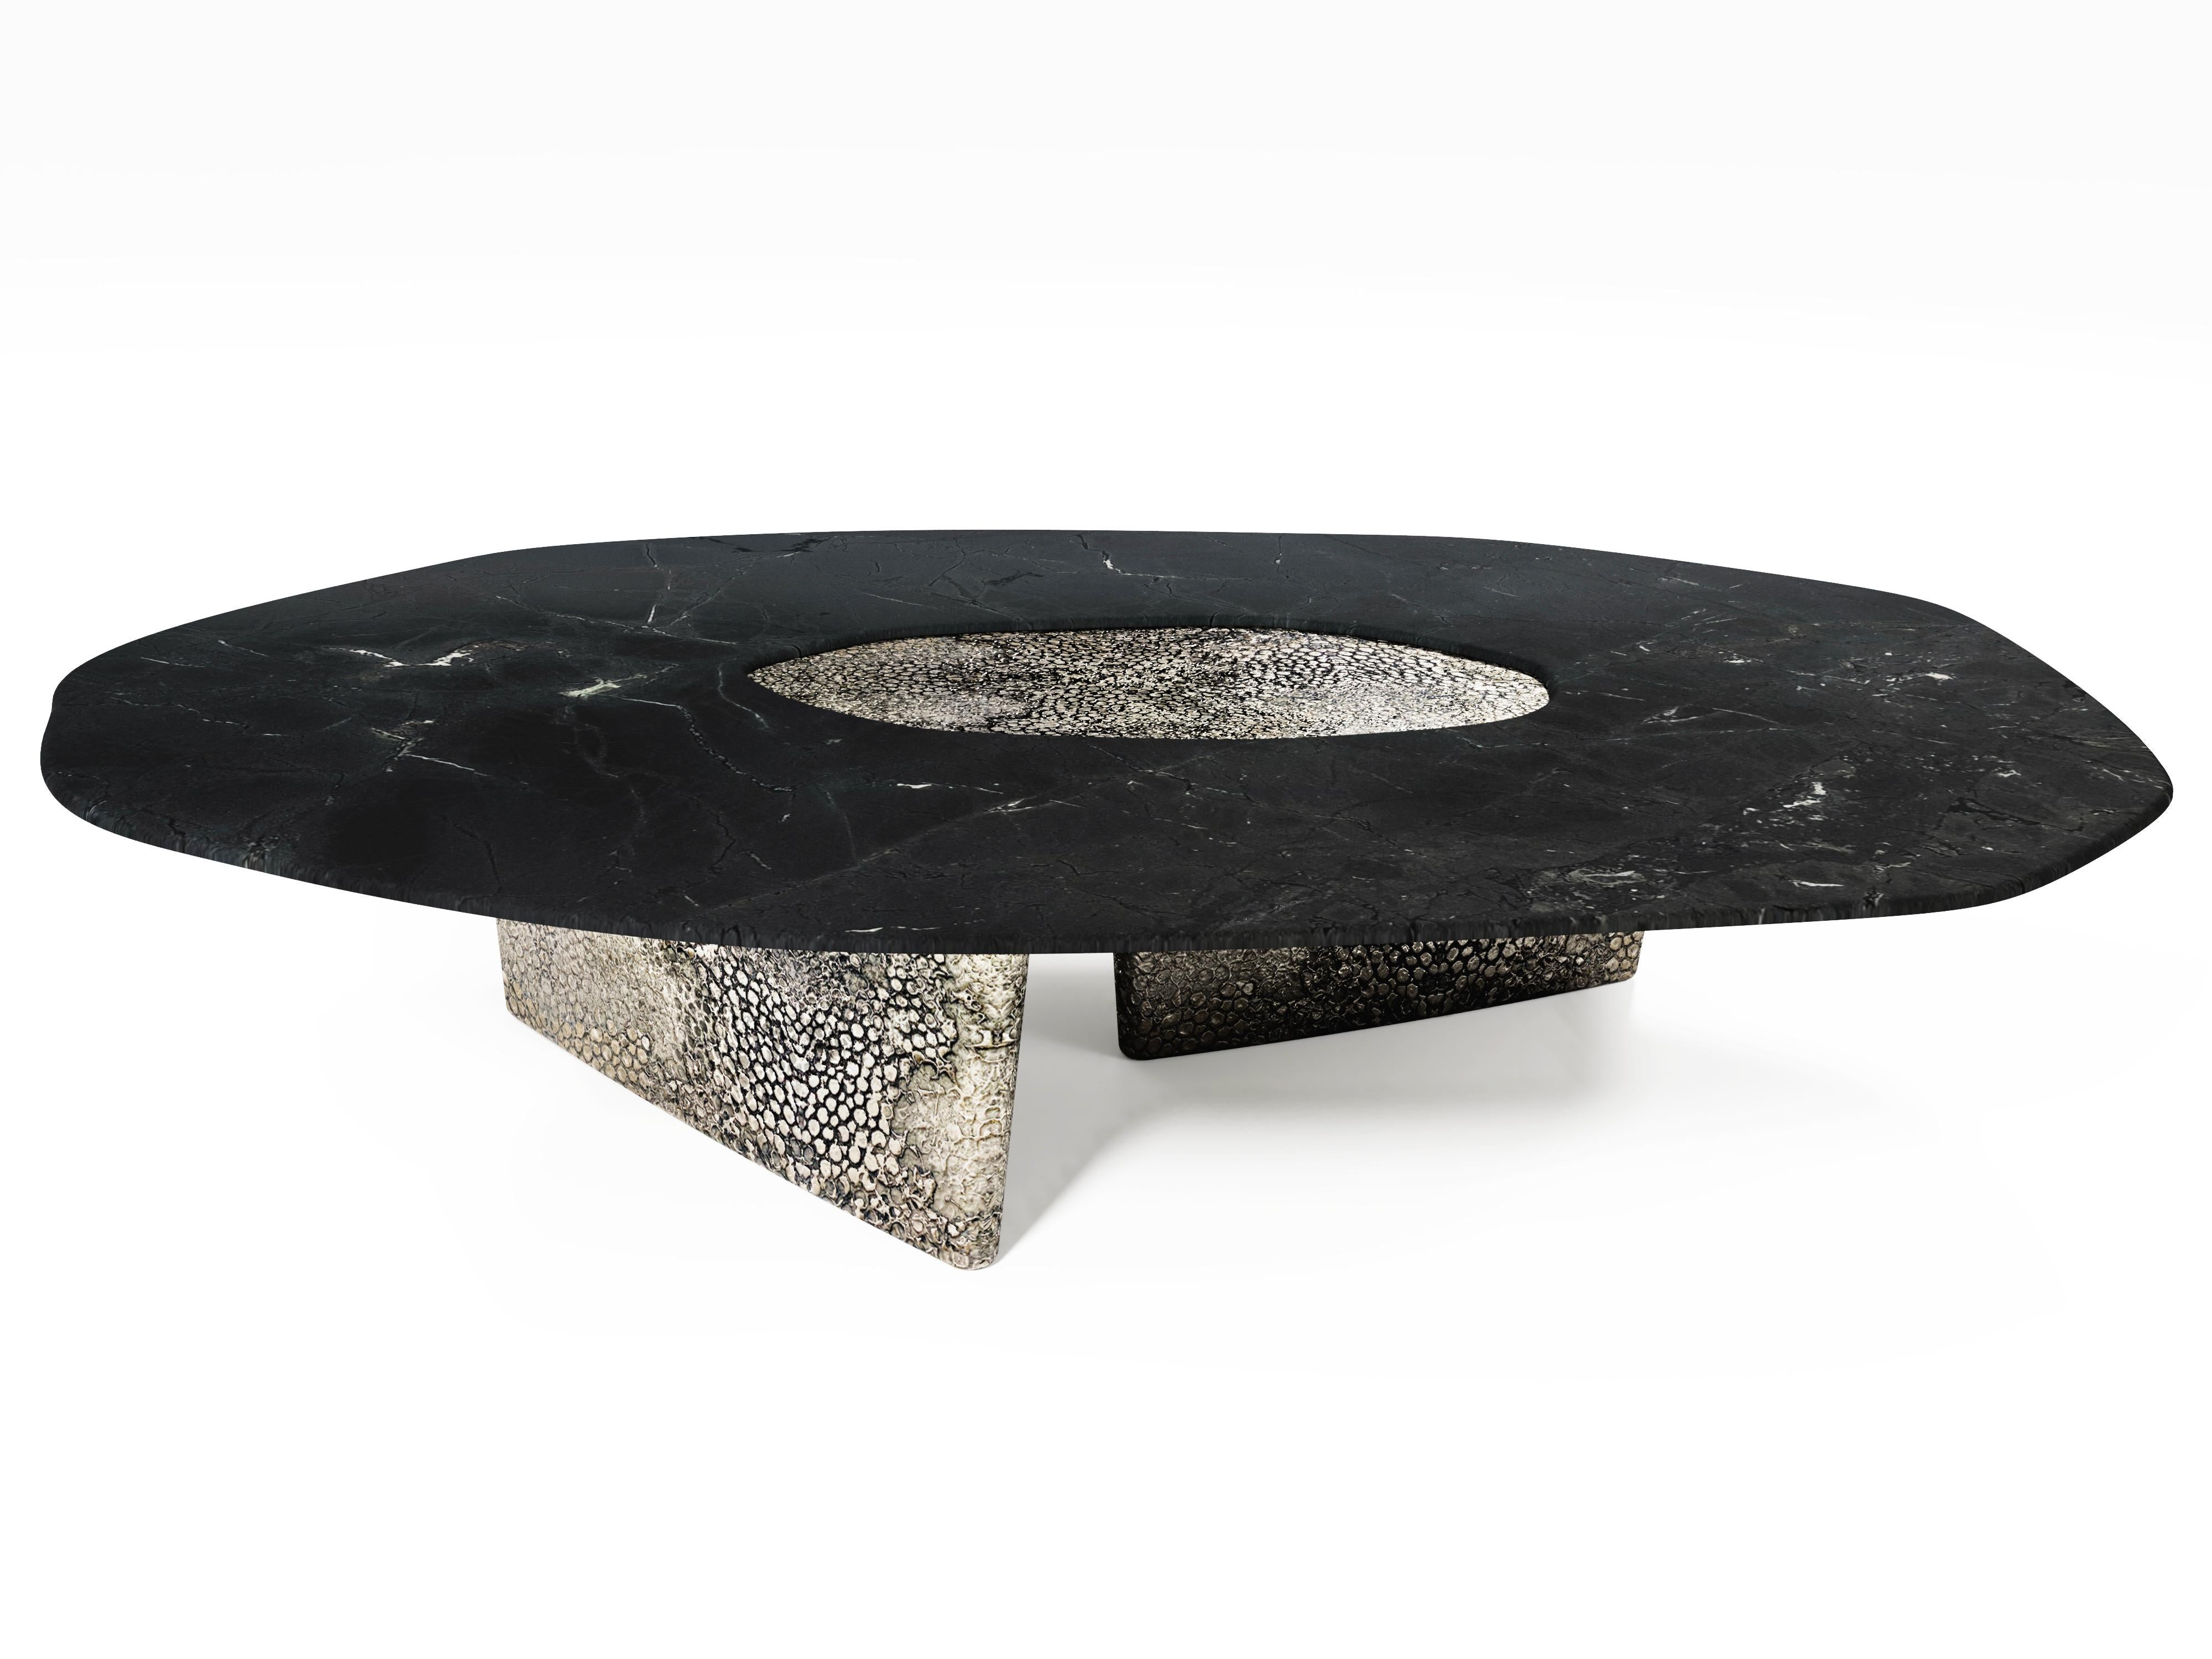 “The Elements V” contemporary center table is one of a kind and one of the series of various coffee tables within Elements collection.

Created of the two totally different shapes, structures reveals some symbiotic influence between each other. One